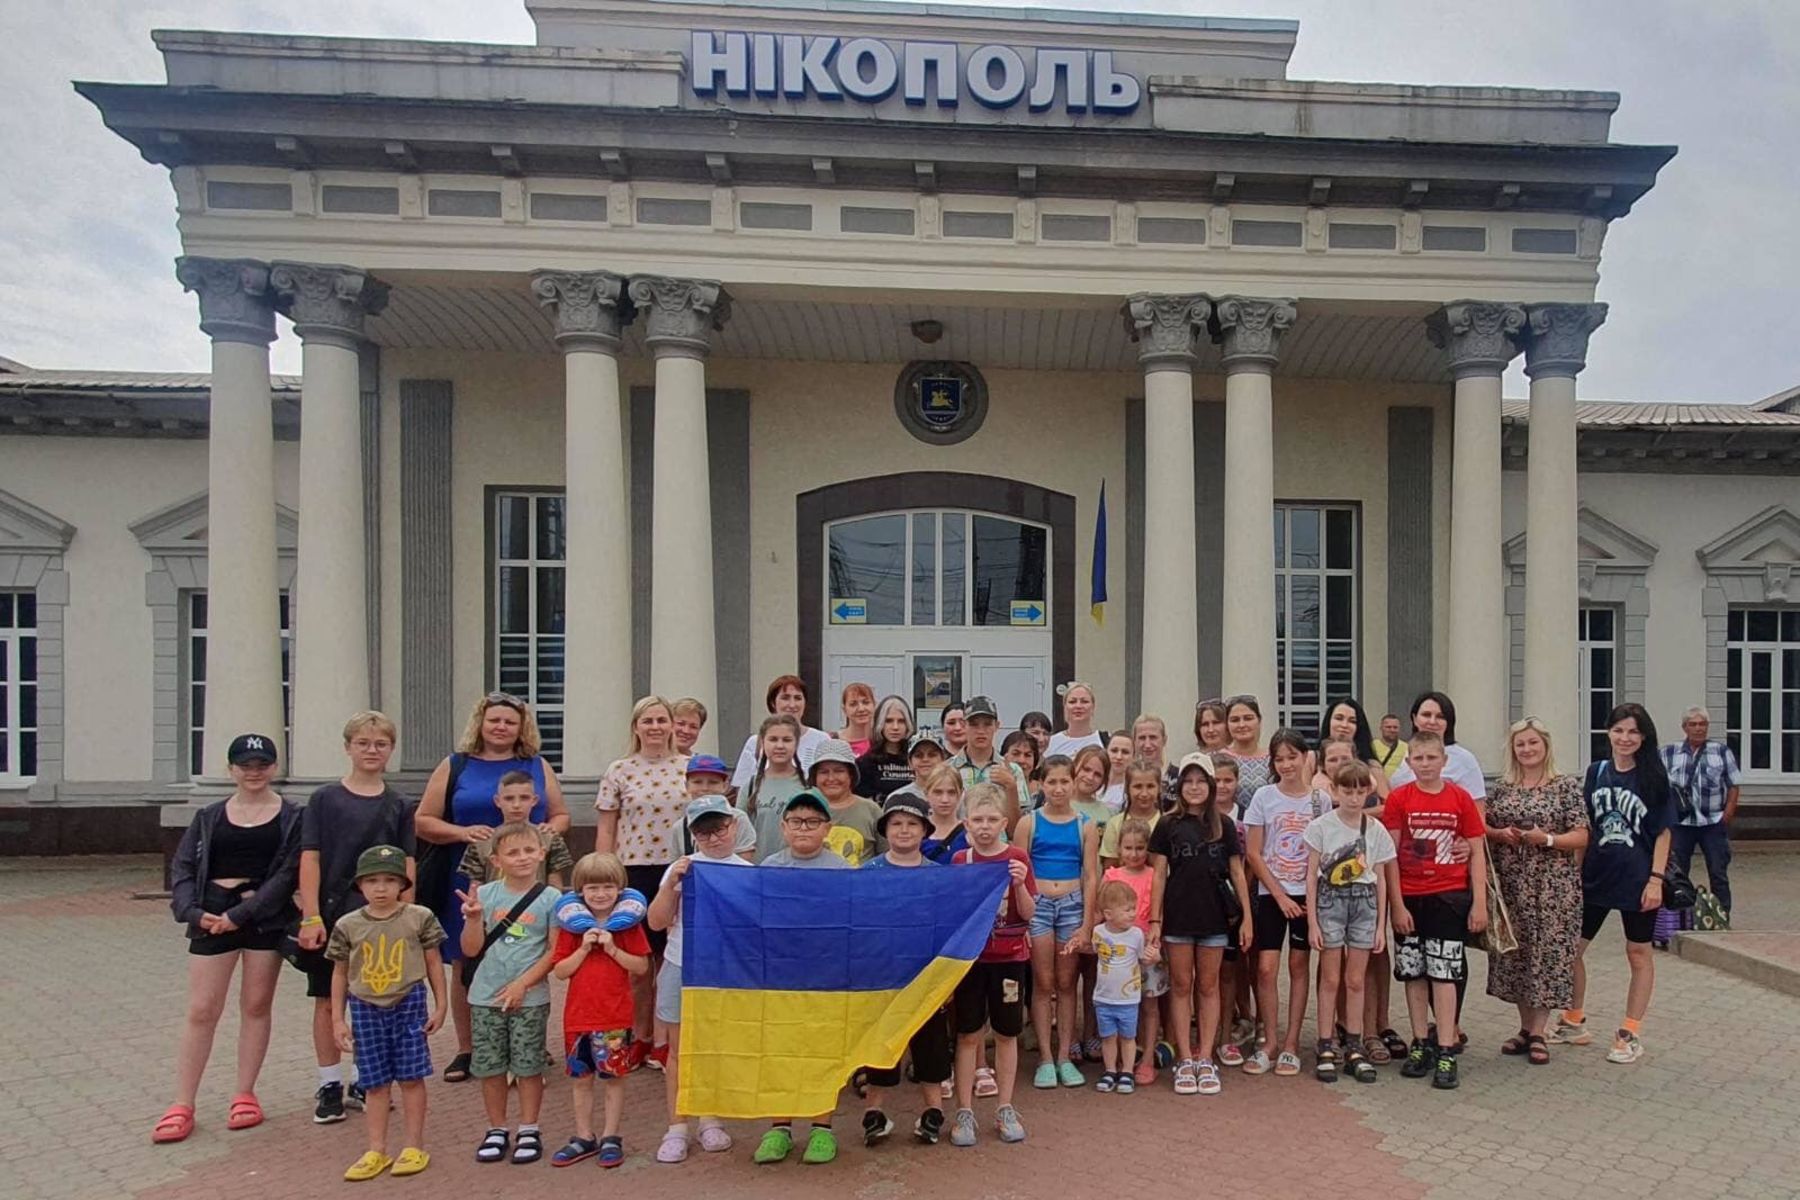  “Free Children”: Patriarchal Foundation Wise Cause Holds Free Summer Camp for Children from Nikopol